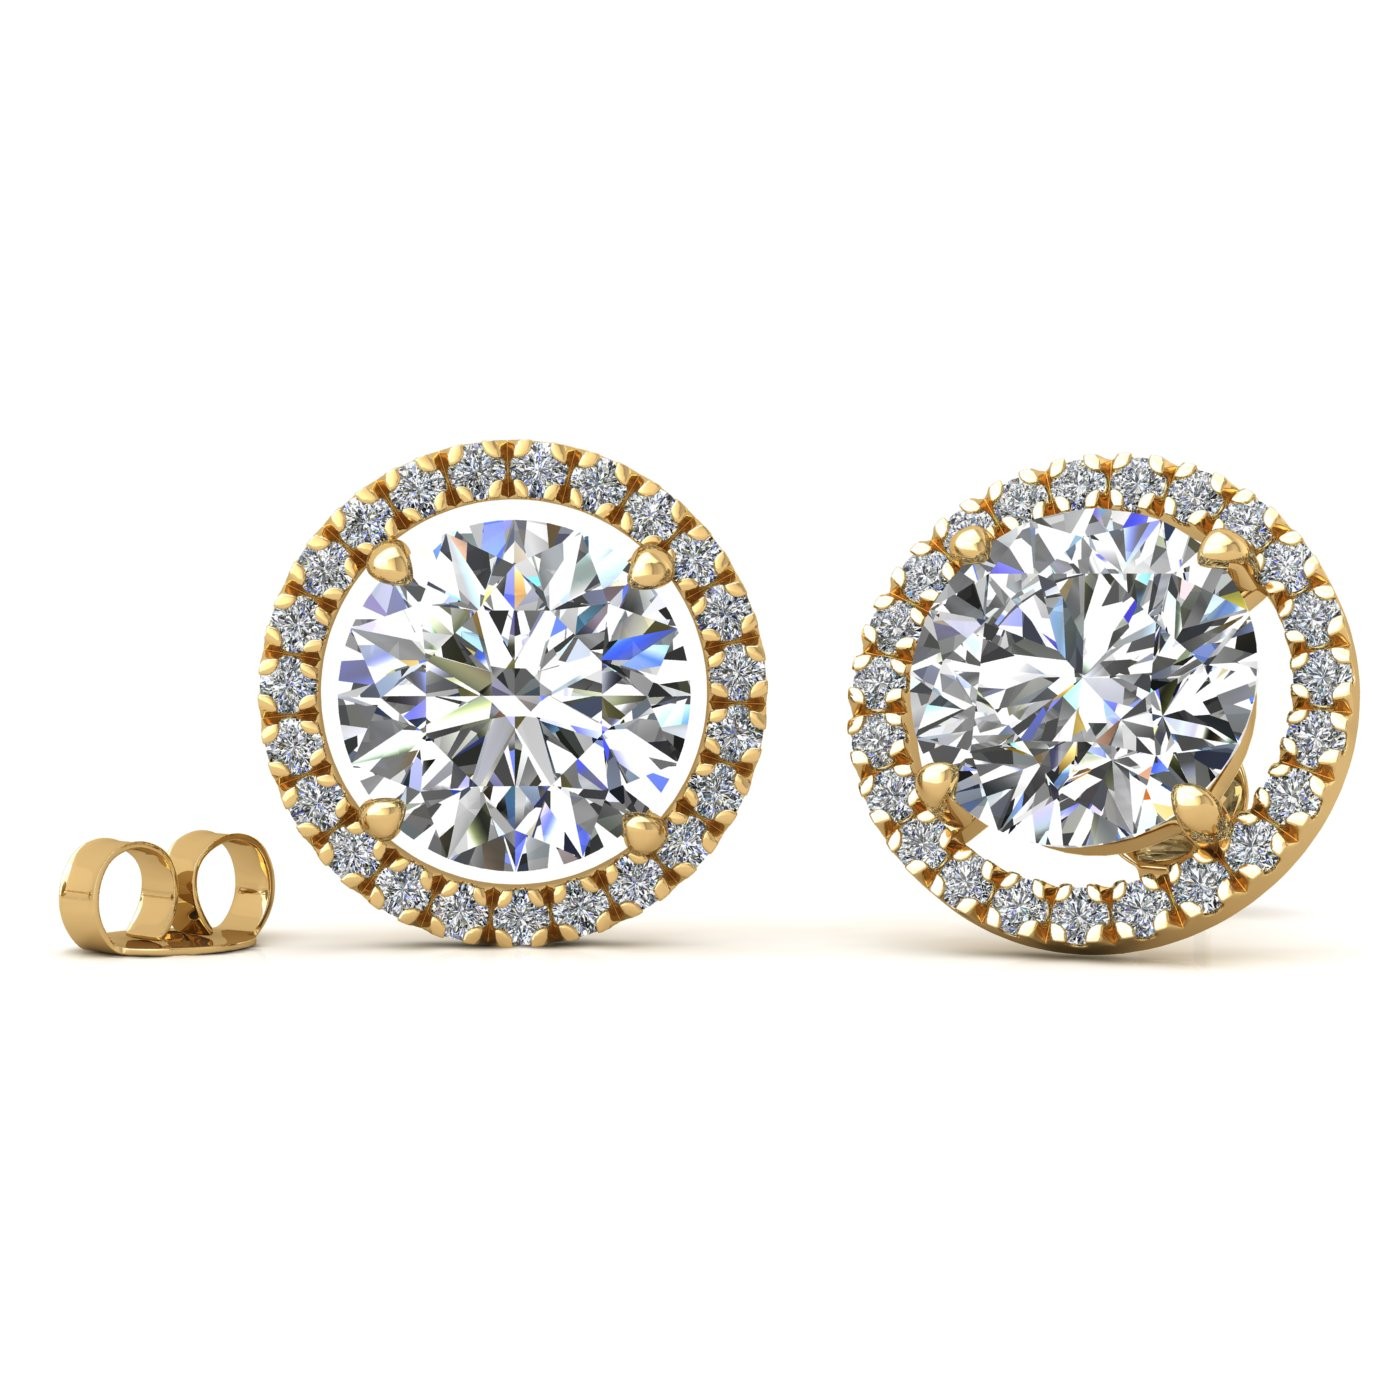 18k yellow gold  0,3 ct each (0,6 tcw) 4 prongs round brilliant cut halo diamond earring studs Photos & images